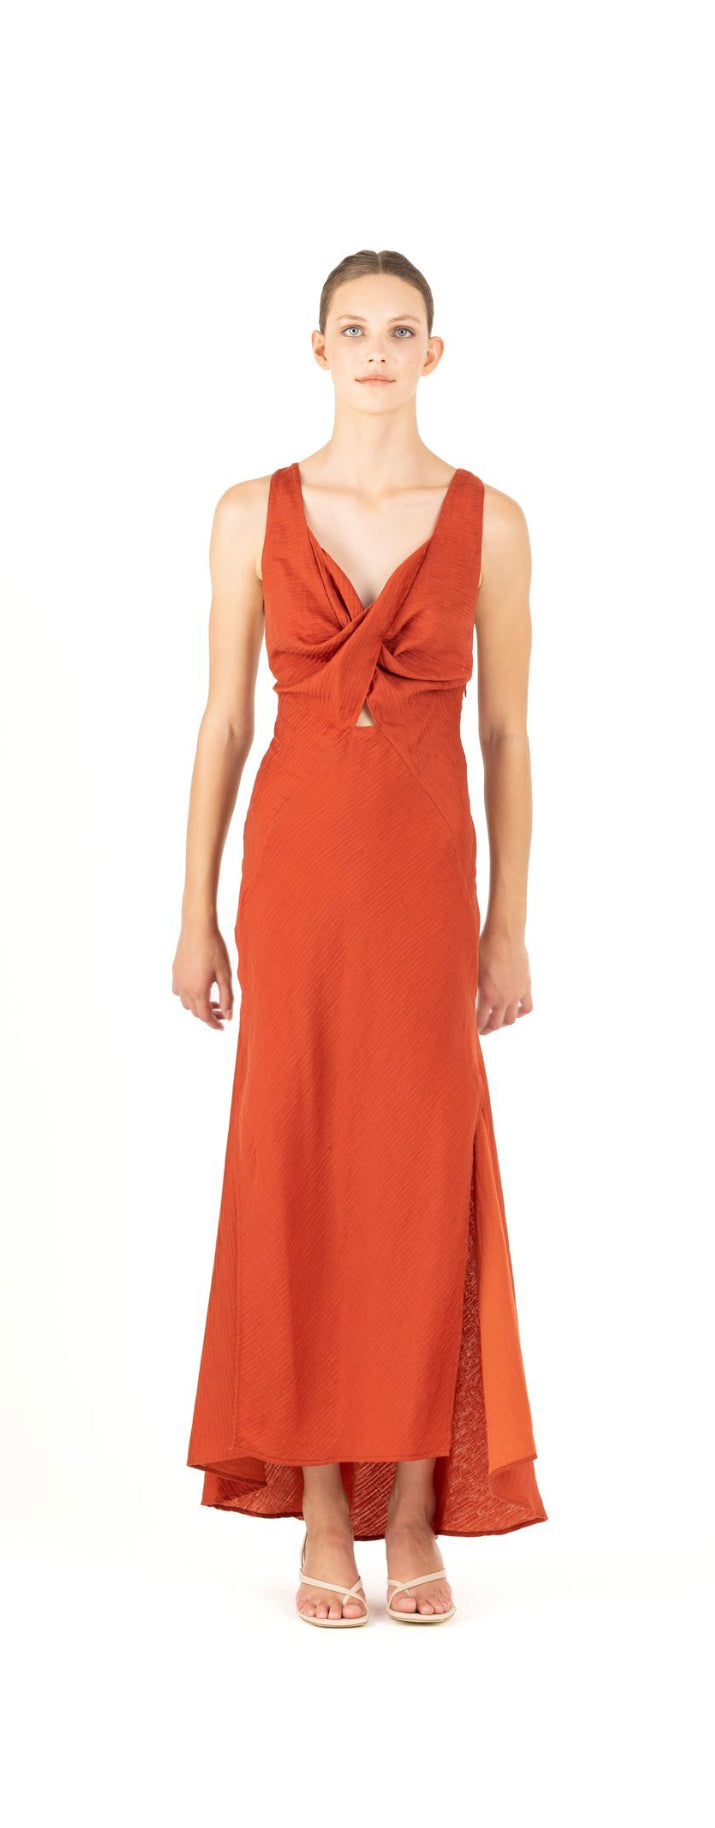 Elysian Collective One Fell Swoop Alessandra Dress Amber